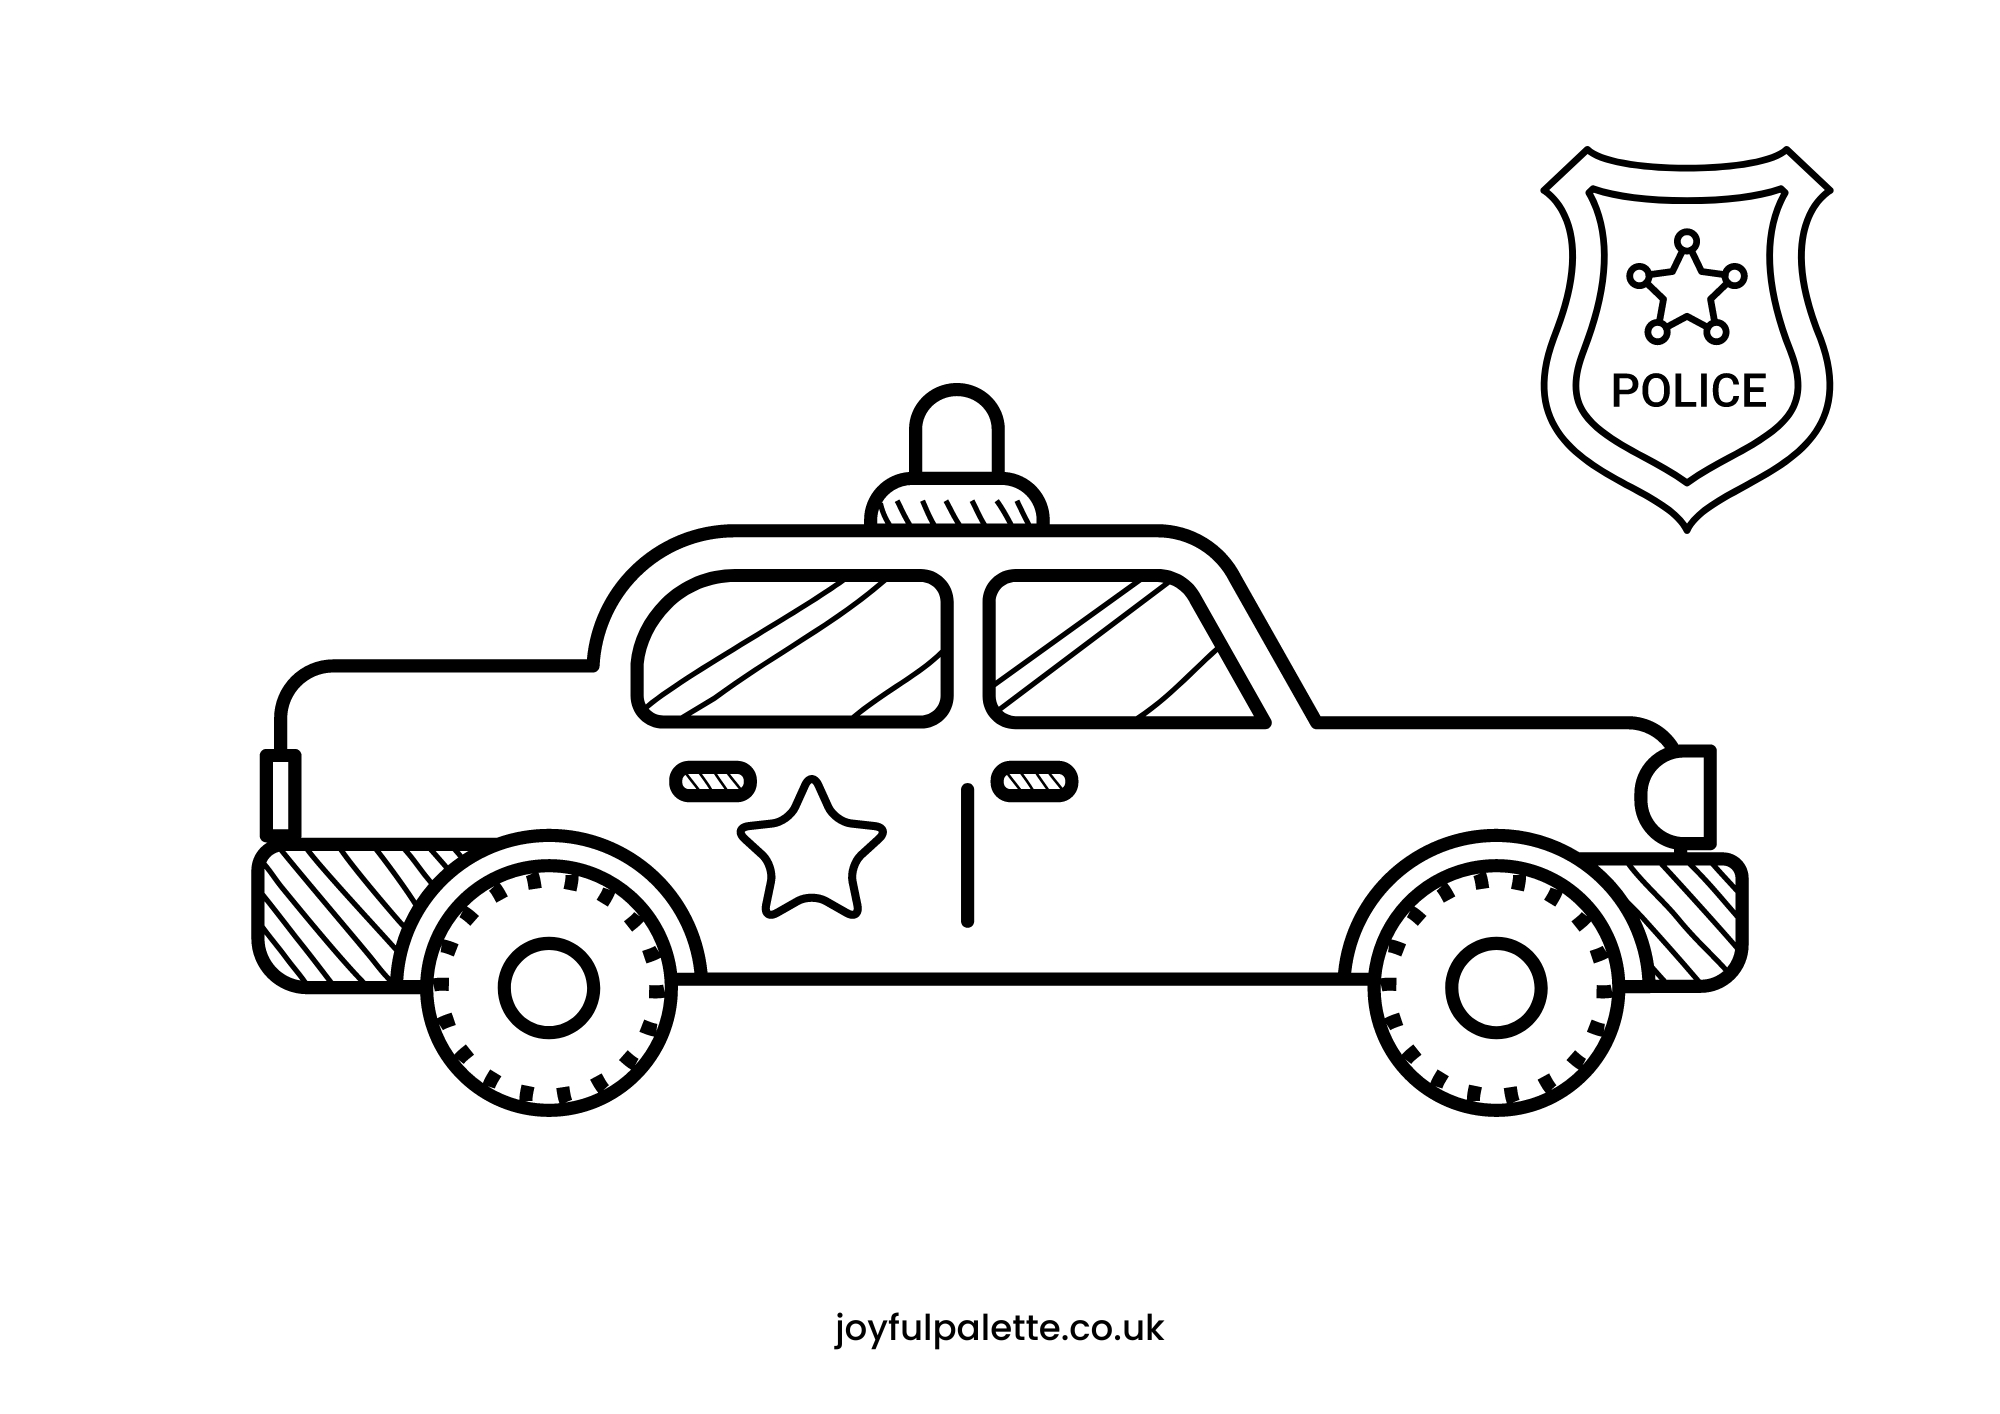 Police Truck Coloring Page